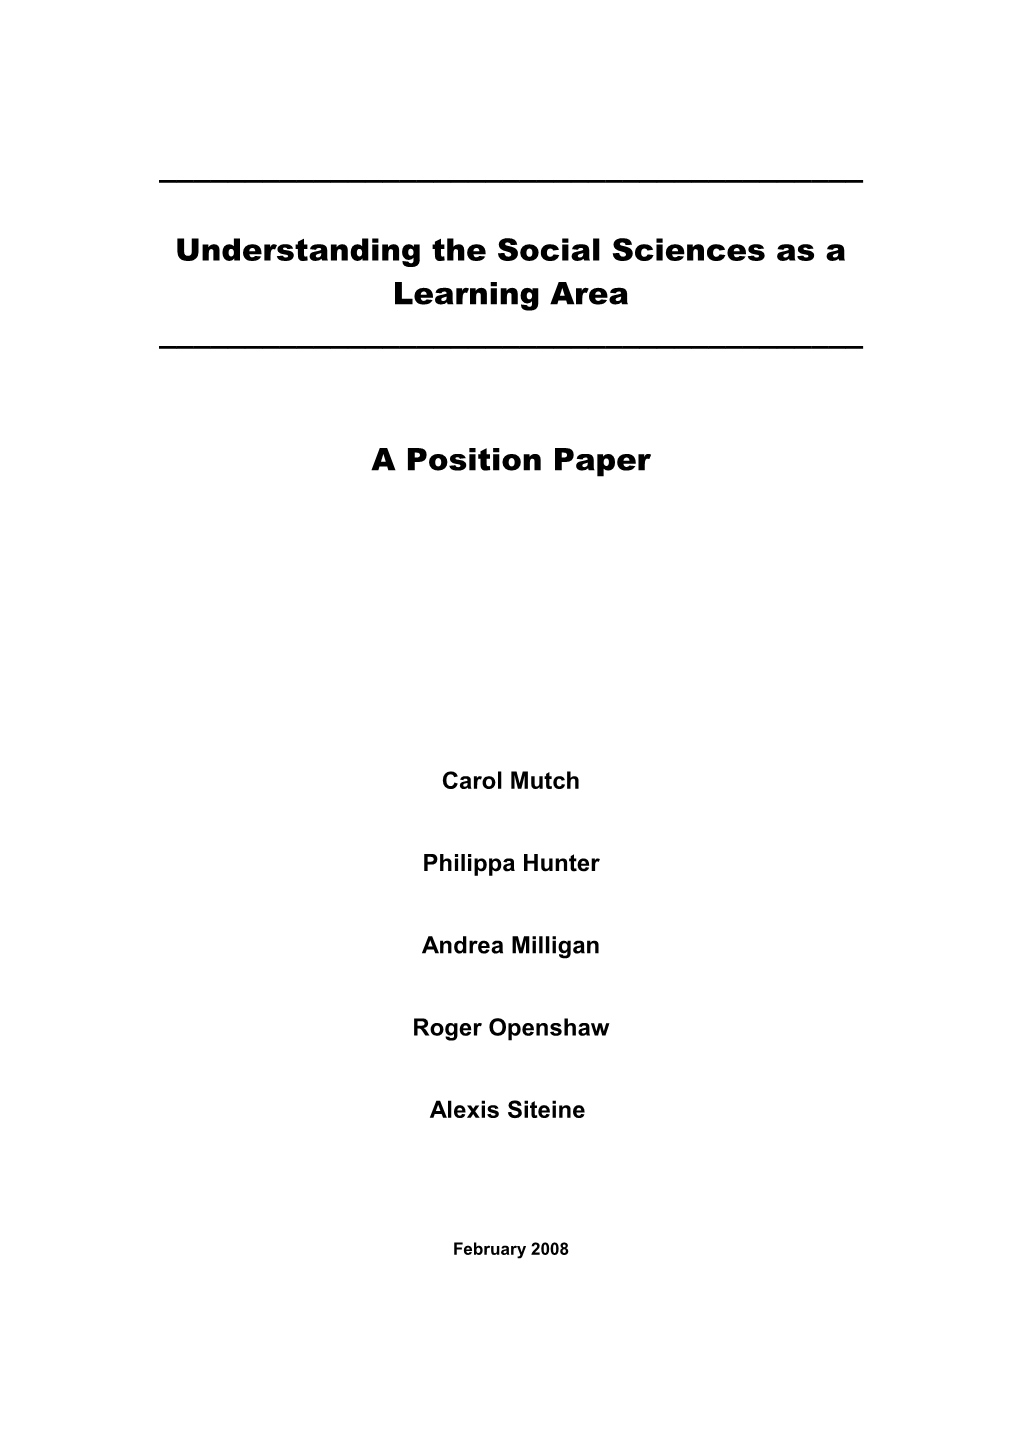 Understanding the Social Sciences As a Learning Area a Position Paper